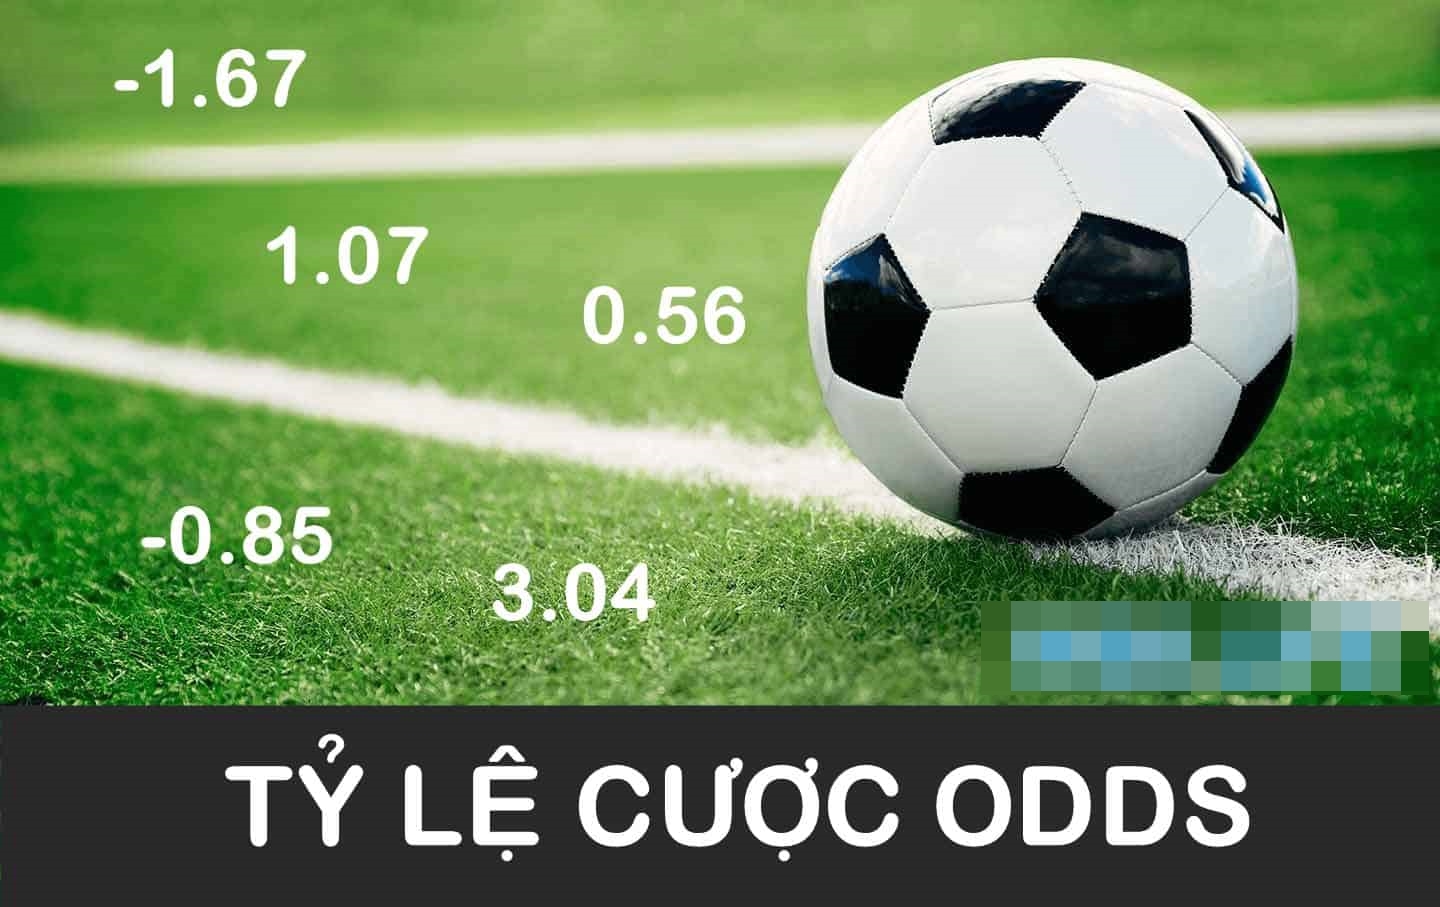 ty-le-cuoc-odds